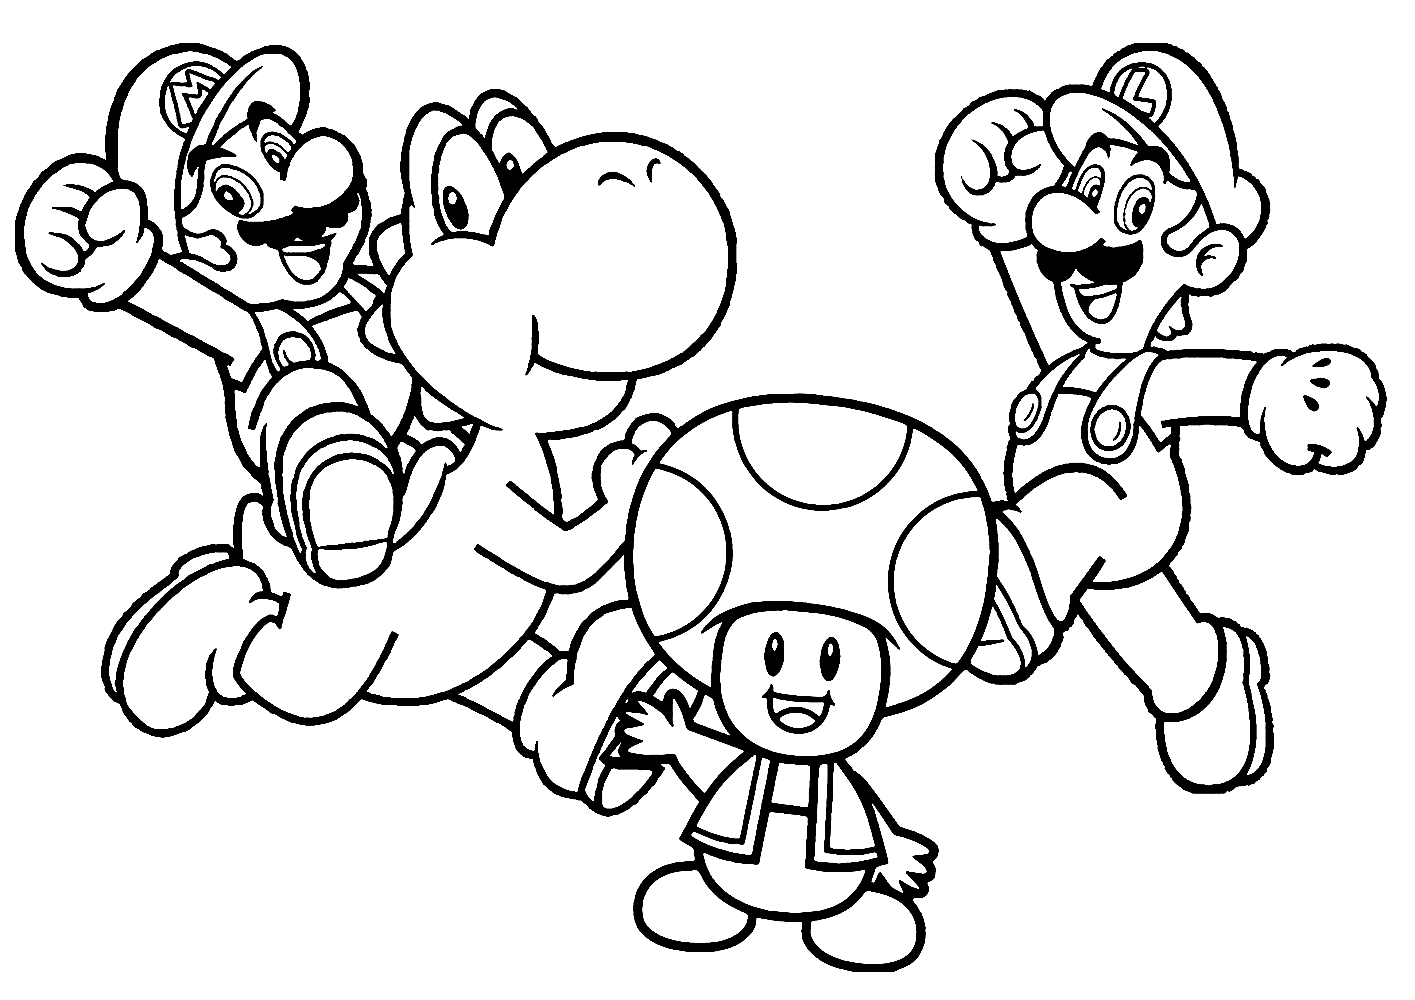 Super Mario Coloring Pages: Mario Brothers (2020) » Print Color Craft